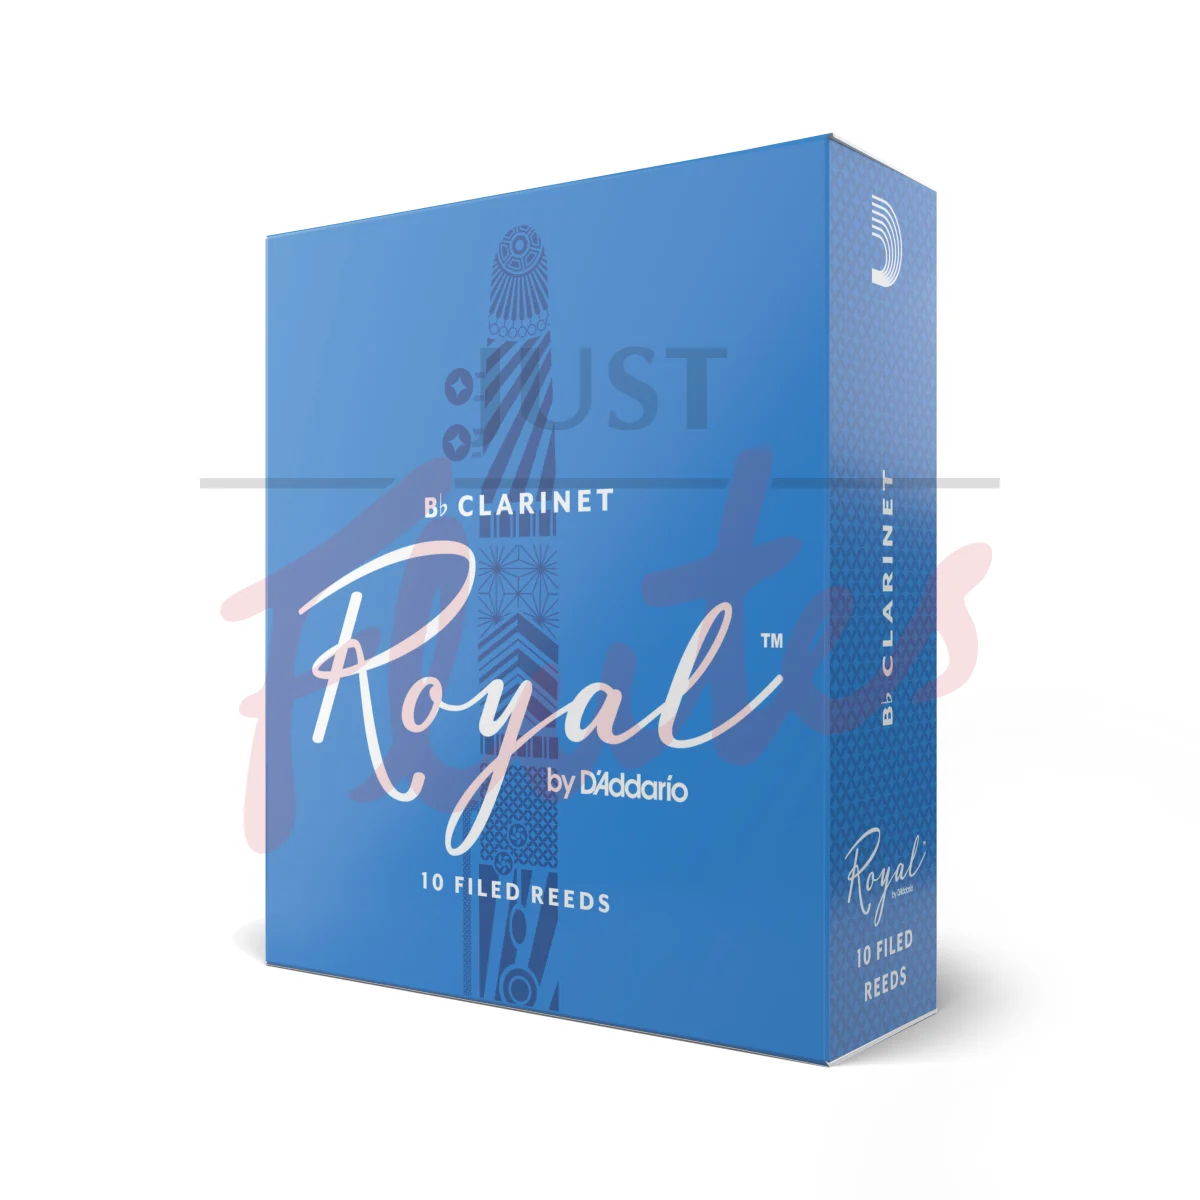 Royal by D'Addario RCB1010 Clarinet Reeds Strength 1, 10-pack